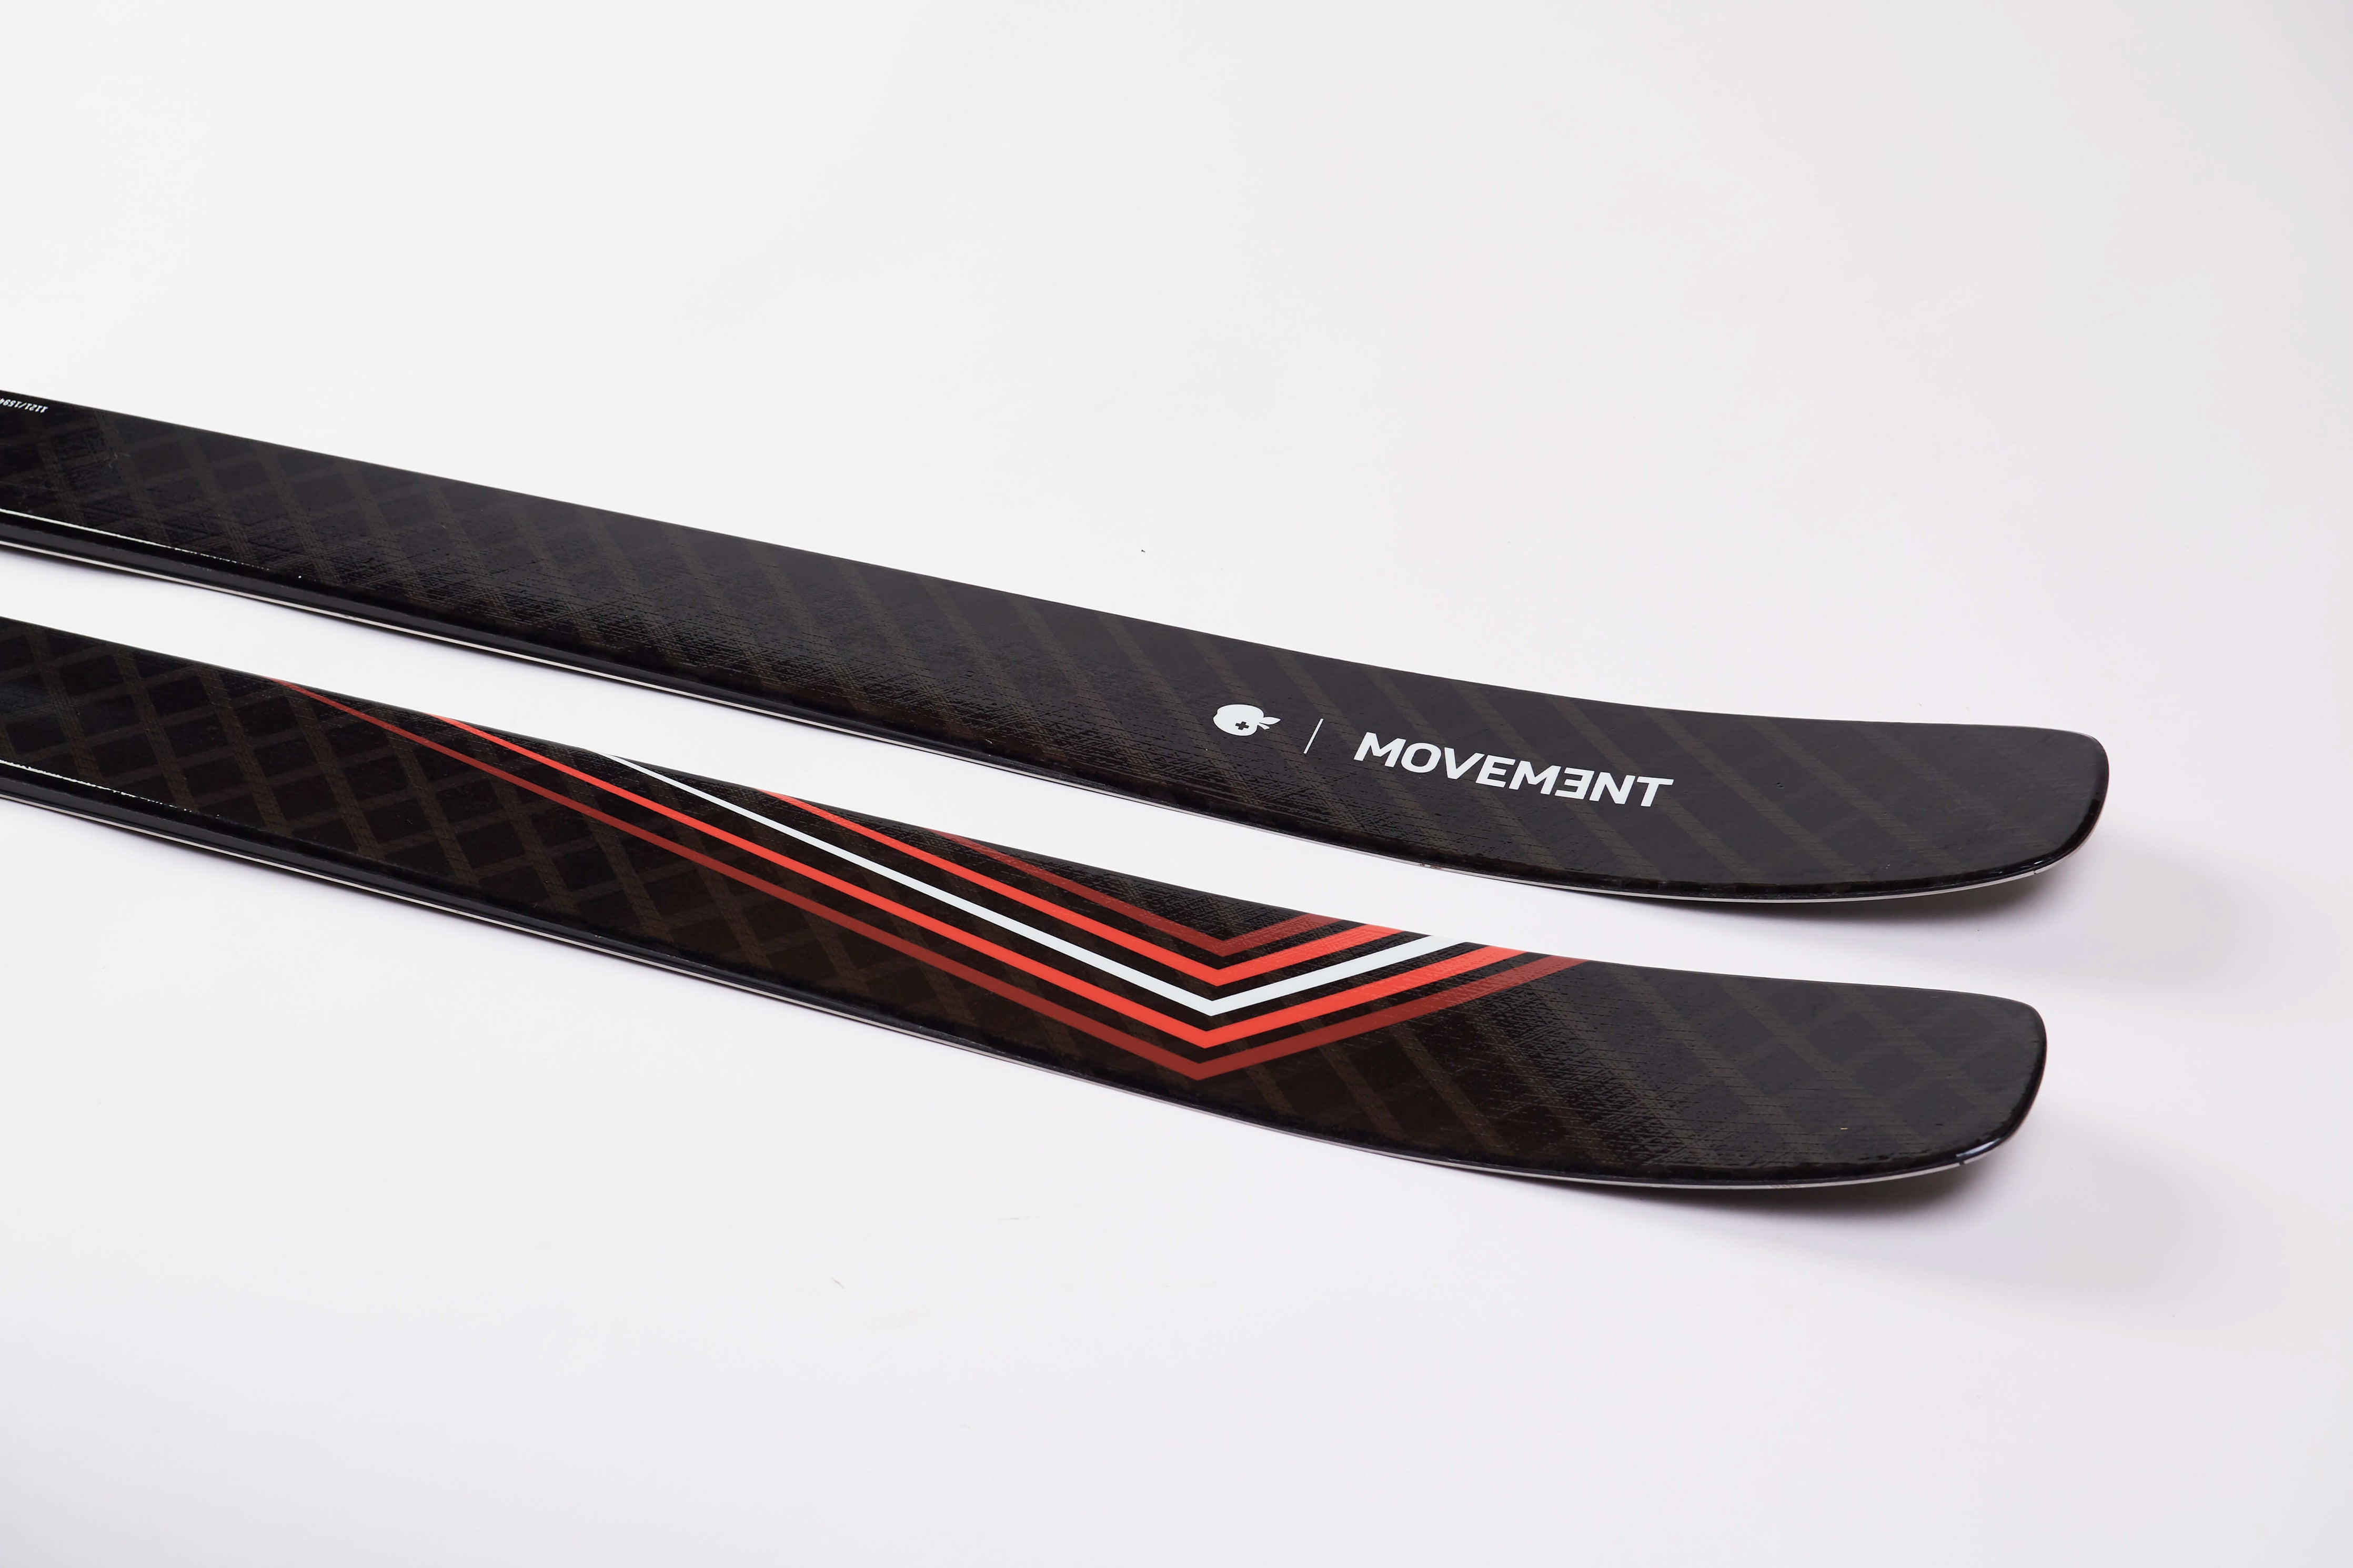 Unleash my touring potential with Movement's Alp Tracks 98 touring skis.